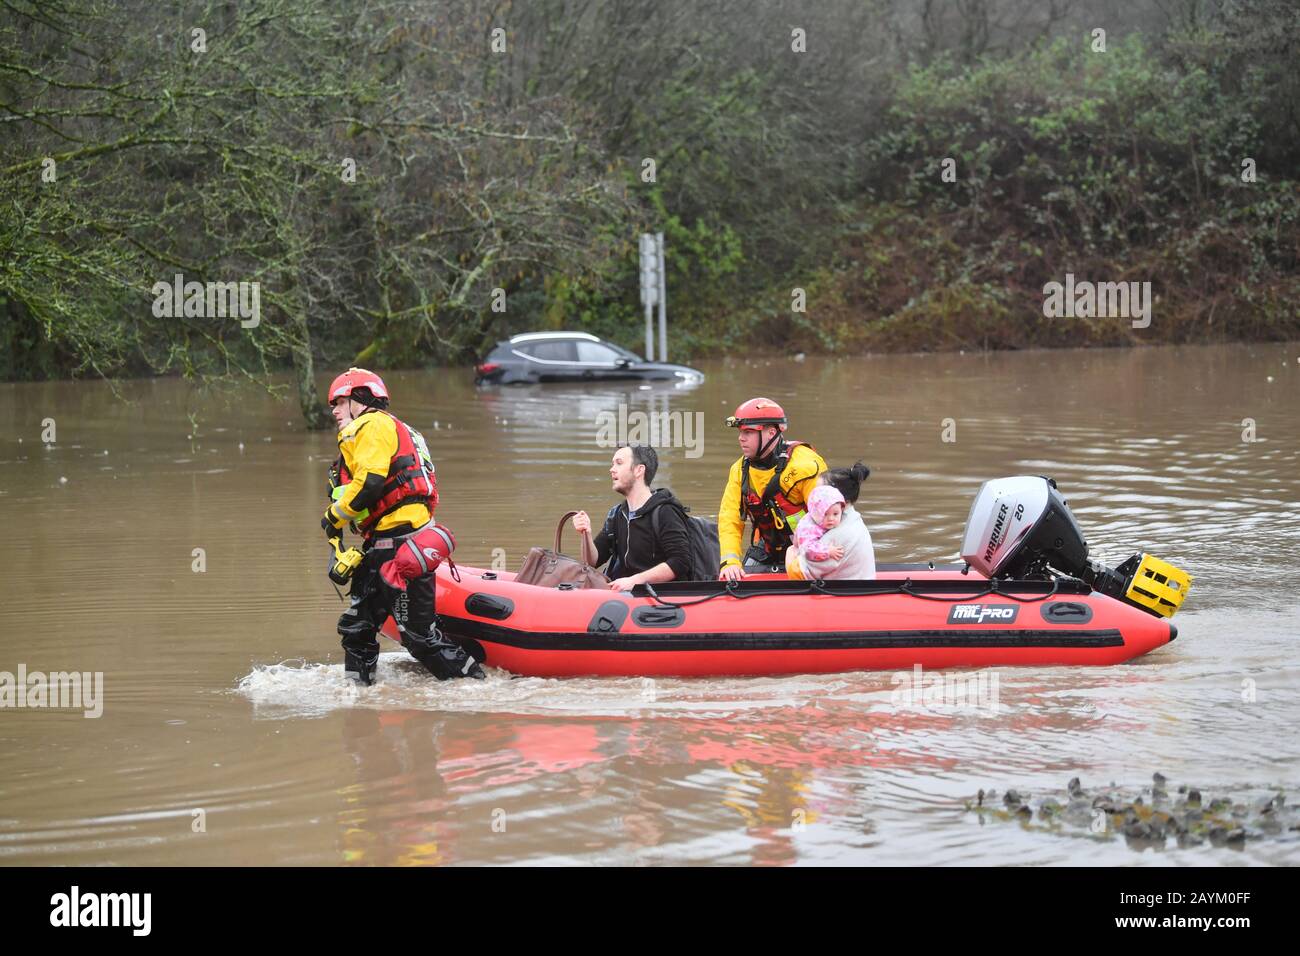 Rescue operations underway after flooding in Nantgarw, Wales after Storm Dennis hit the UK. Stock Photo